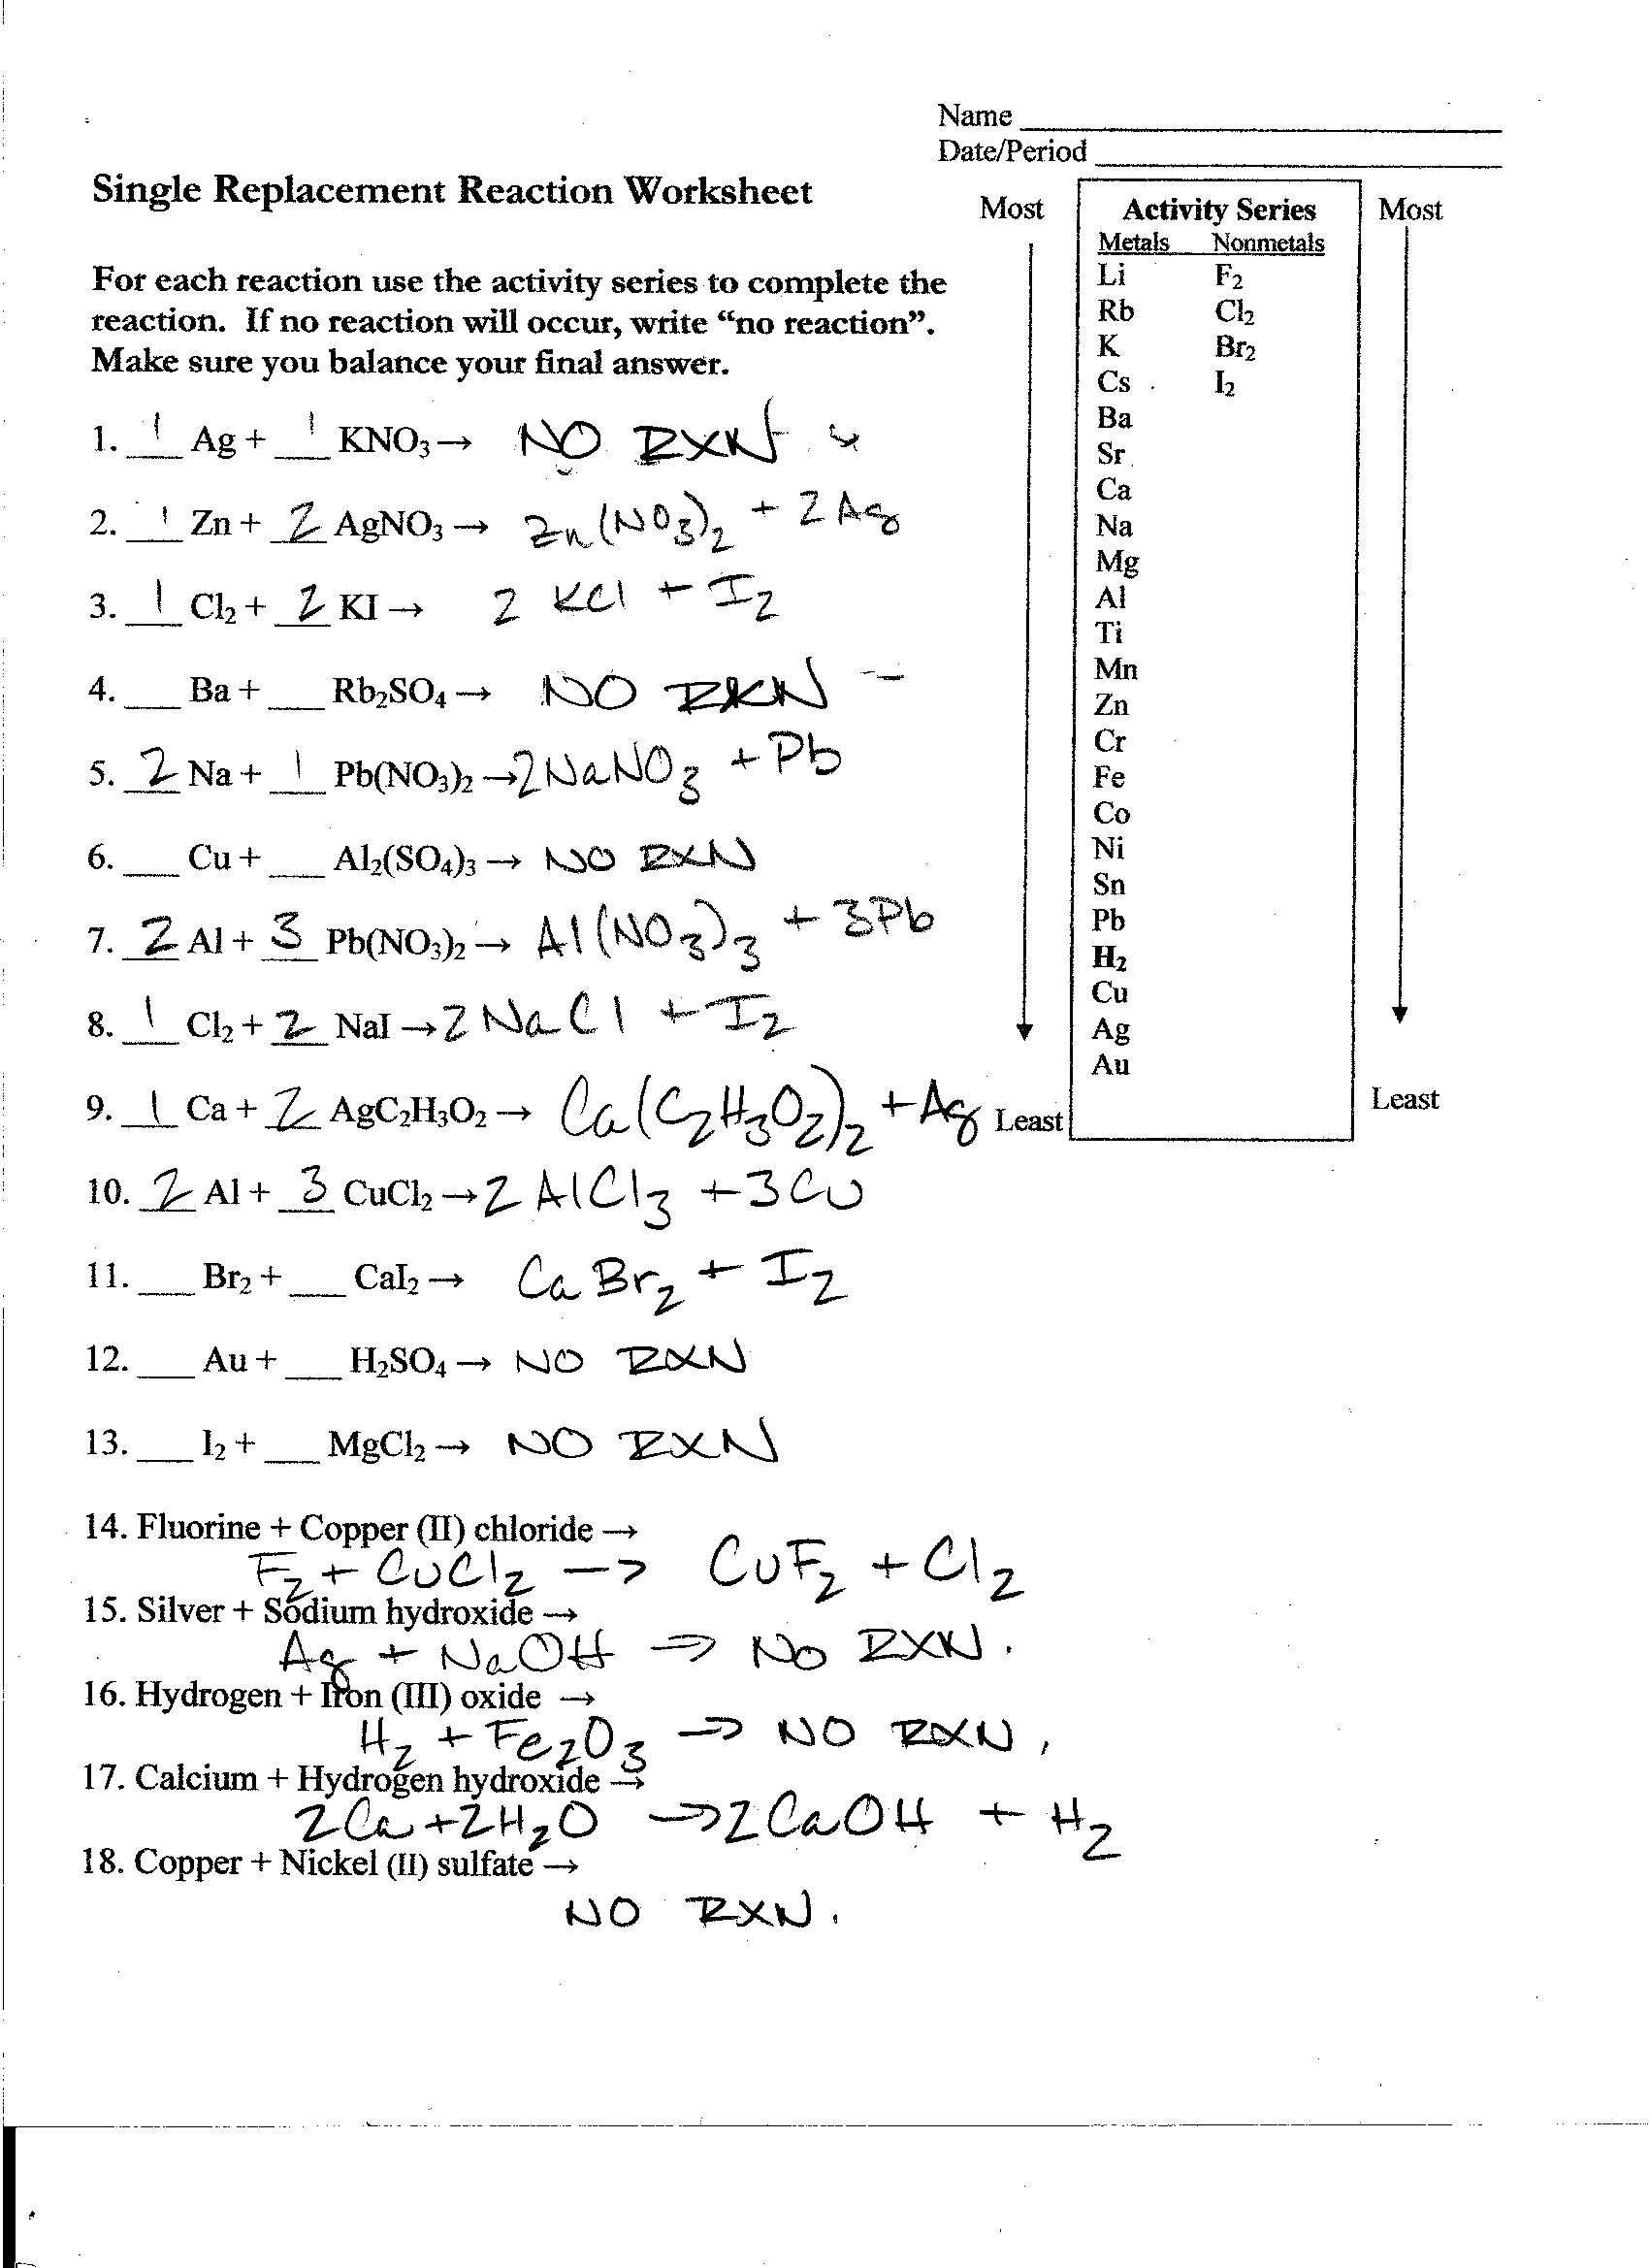 Redox Reaction Worksheet with Answers or Predicting Products Worksheet with Answers 2010 the Best Worksheets